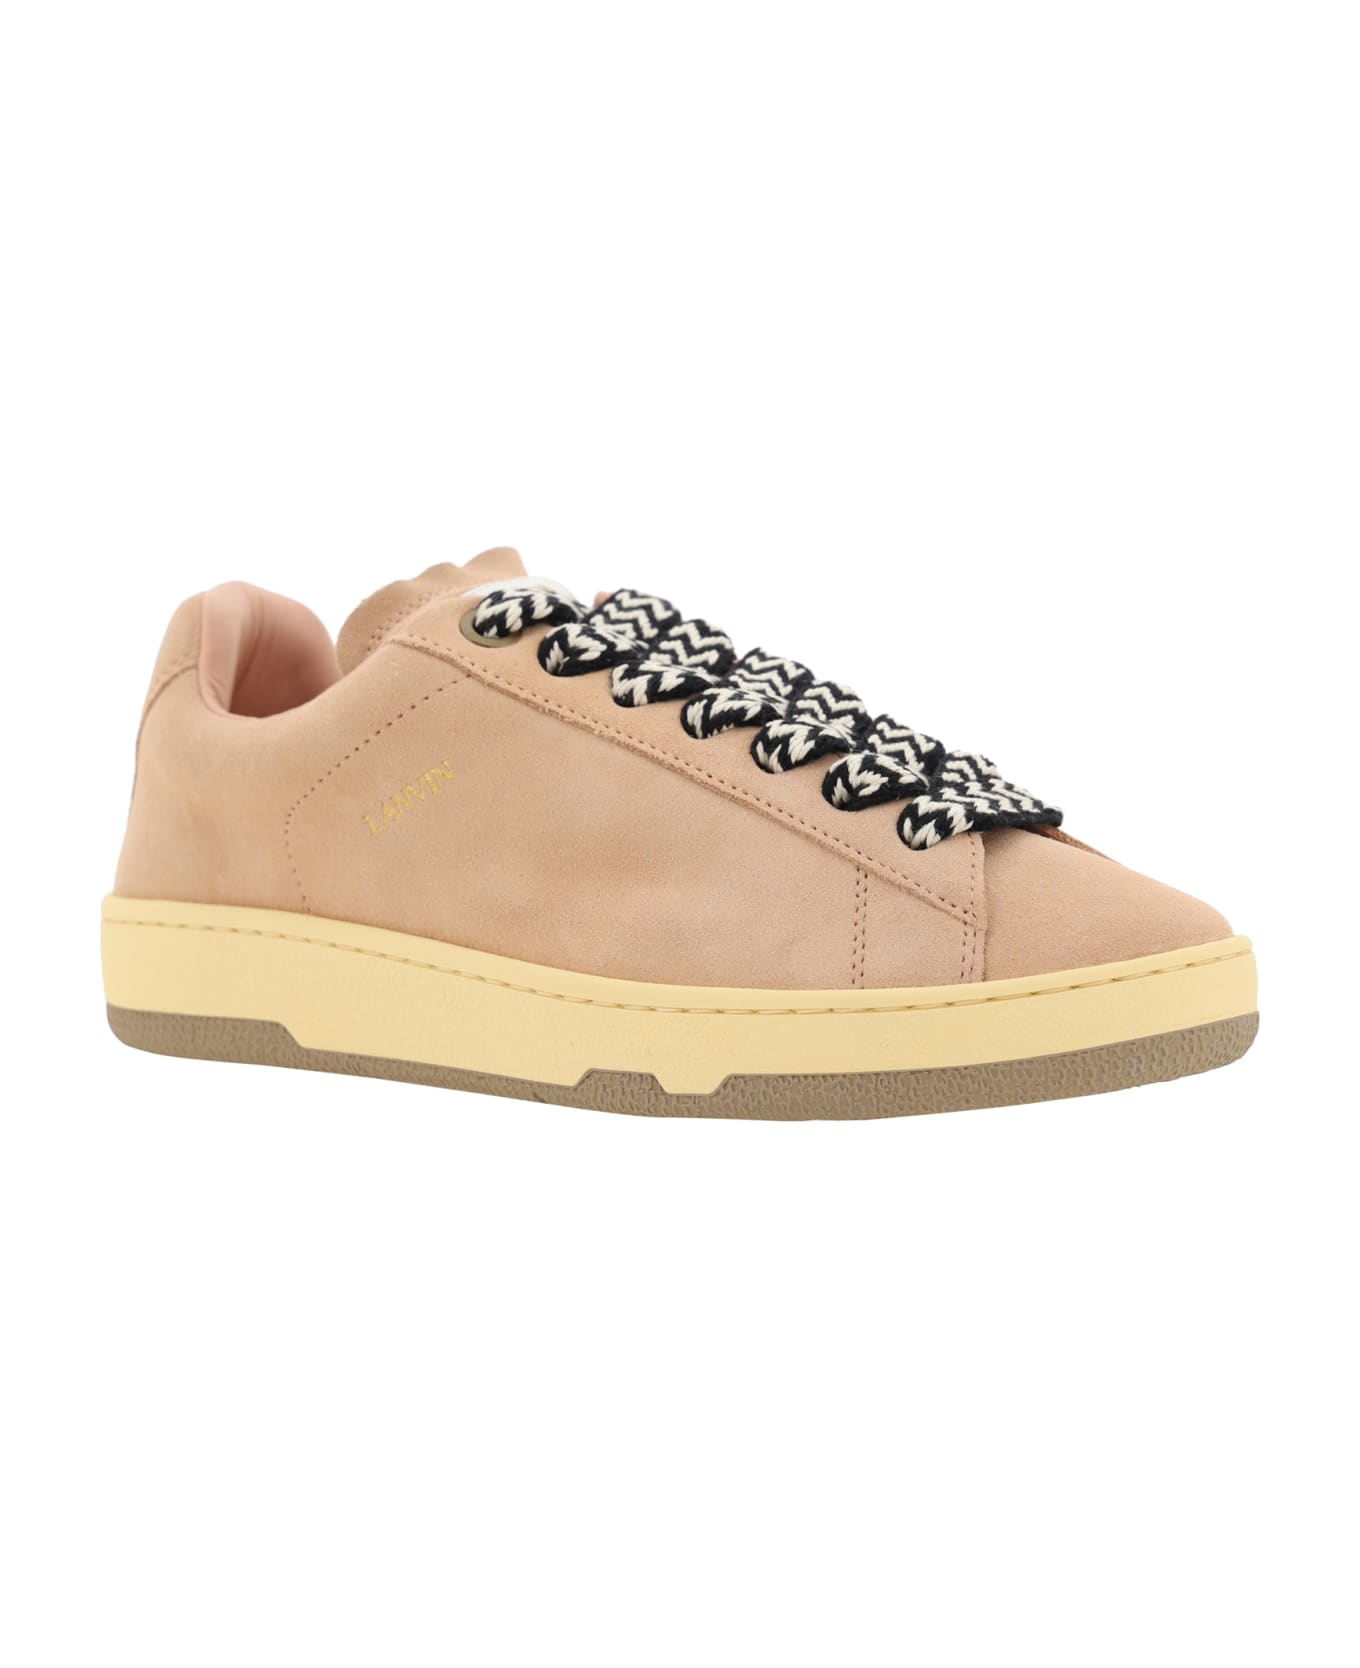 Lanvin Curb Sneakers - Pale Pink スニーカー